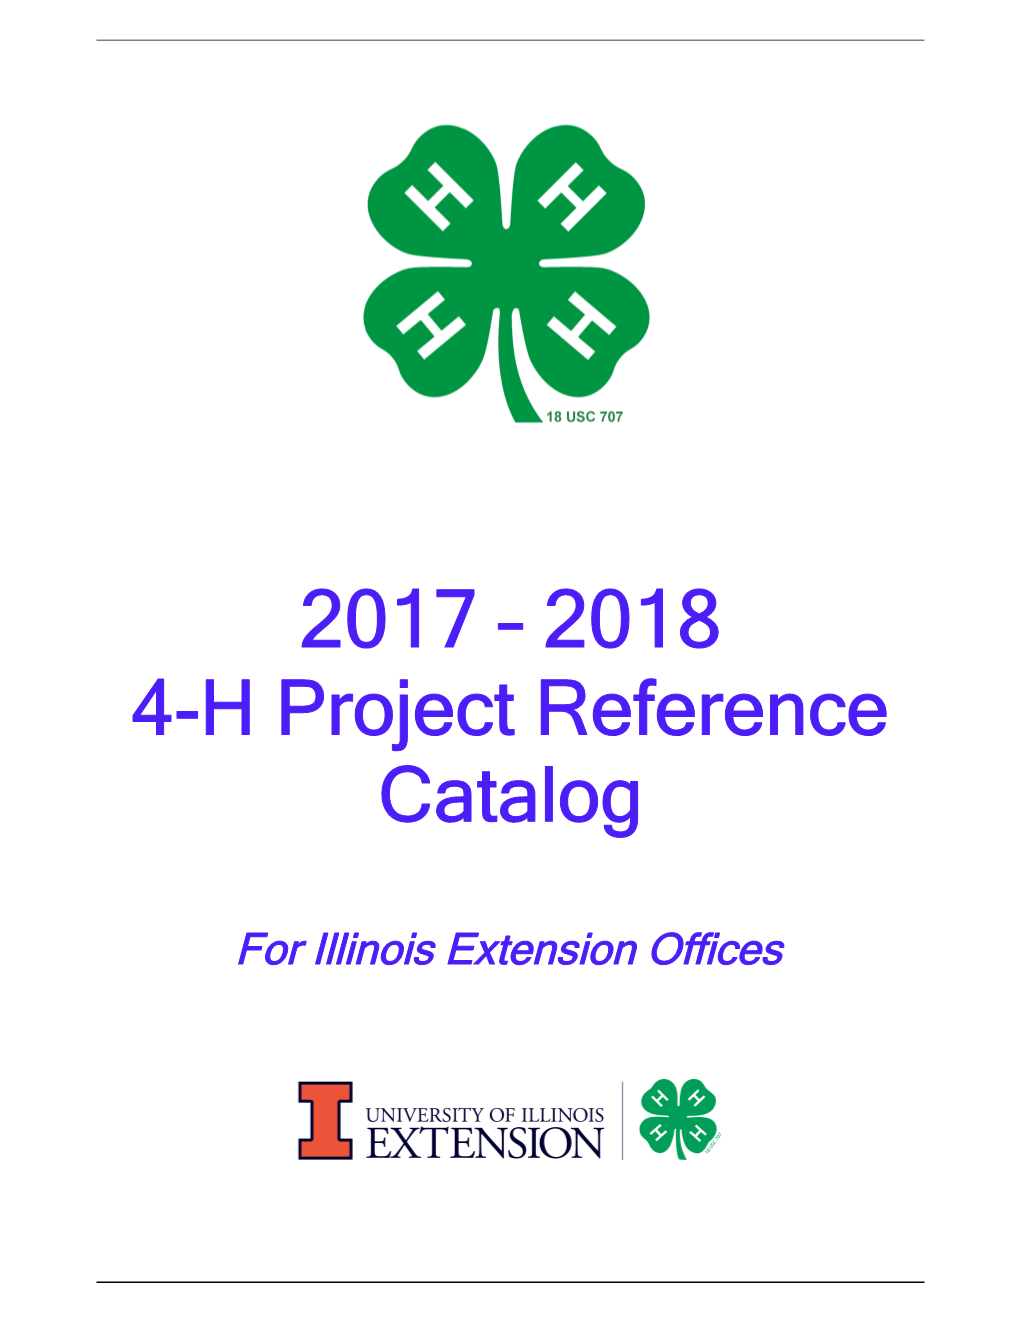 For Illinois Extension Offices